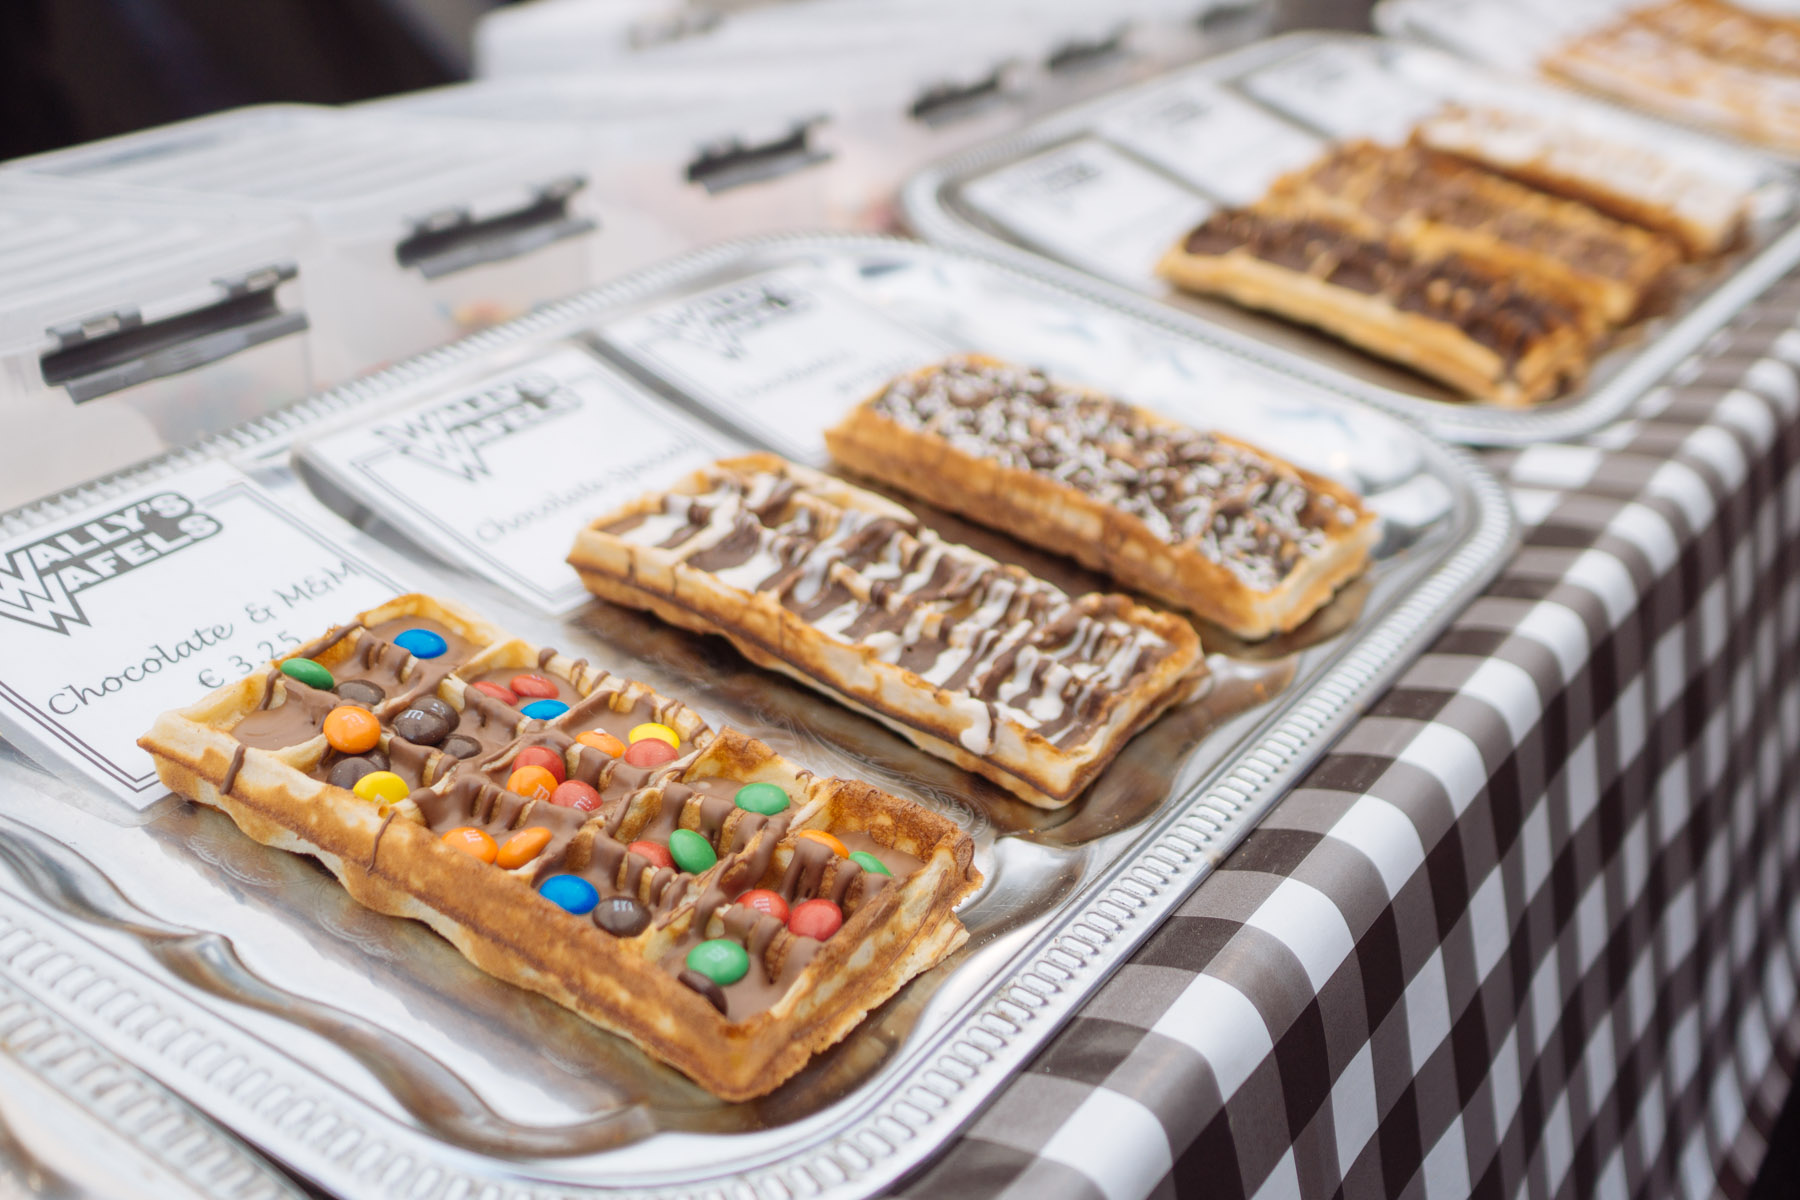 Must Eat Foods in Amsterdam, The Netherlands at Albert Cuyp Market